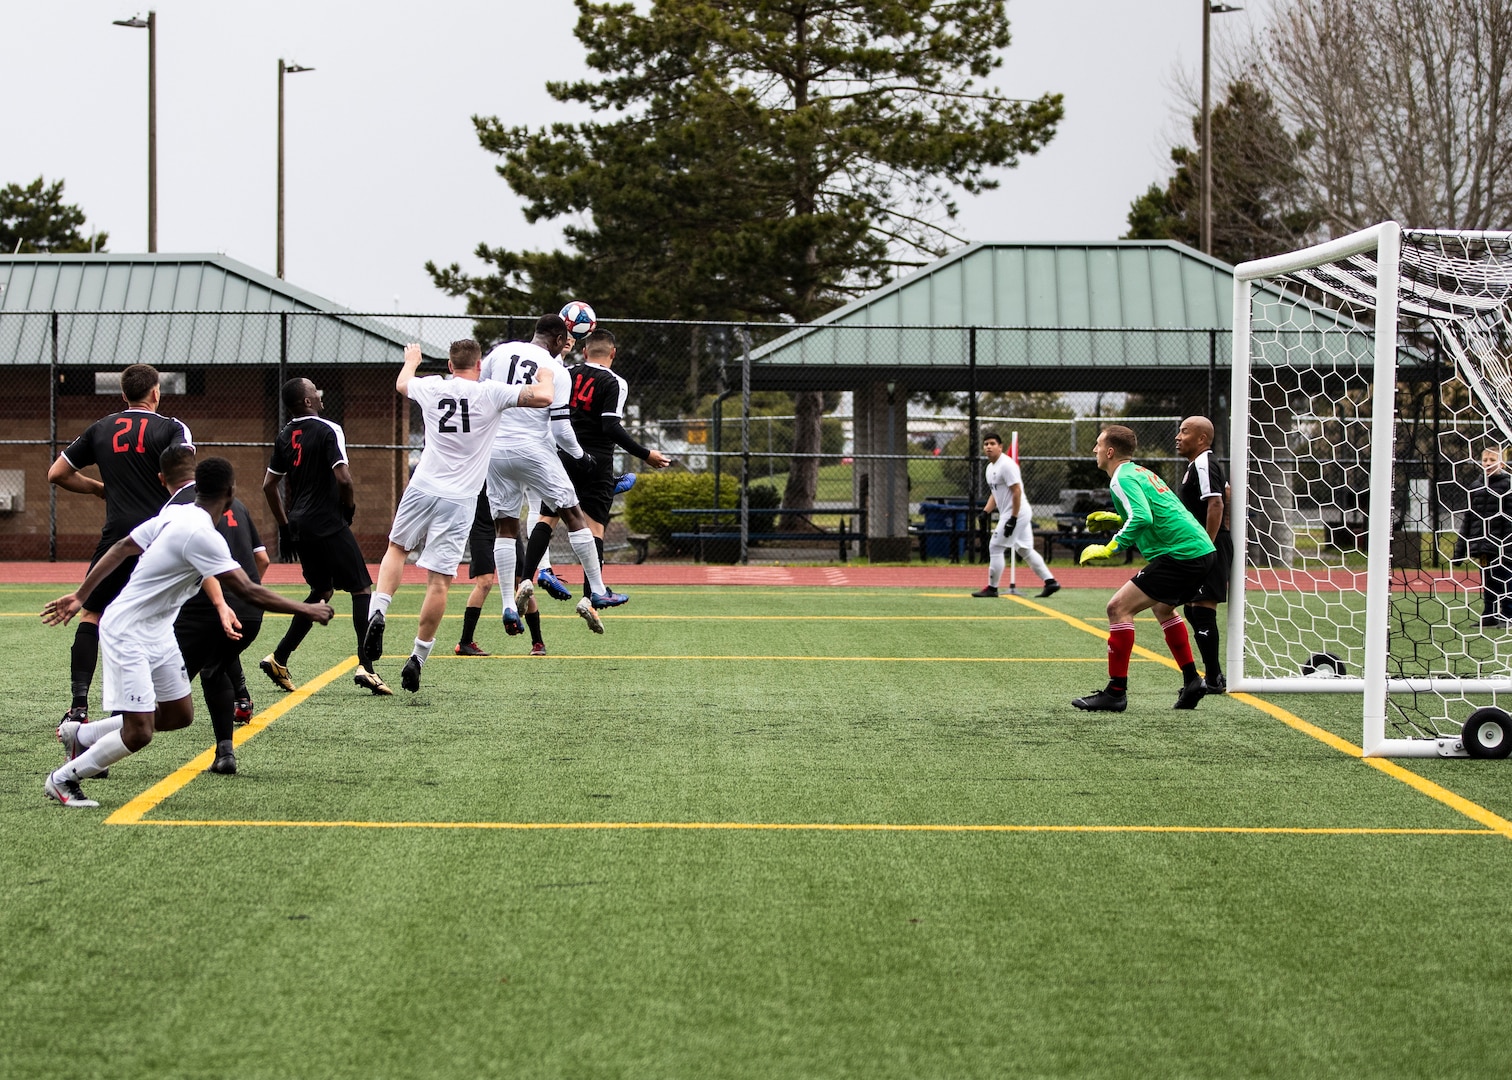 NAVAL STATION EVERETT, Wa. (April 14, 2019) - Navy soccer team’s Petty Officer 1st Class Damion Brown, stationed at Eglin Air Force Base, Fl., knocks in the header to score a goal against the Marine Corp. team during the opening match of the Armed Forces Sports Men’s Soccer Championship hosted at Naval Station Everett. (U.S. Navy Photo by Mass Communication Specialist 2nd Class Ian Carver/RELEASED). 190414-N-XK513-0744